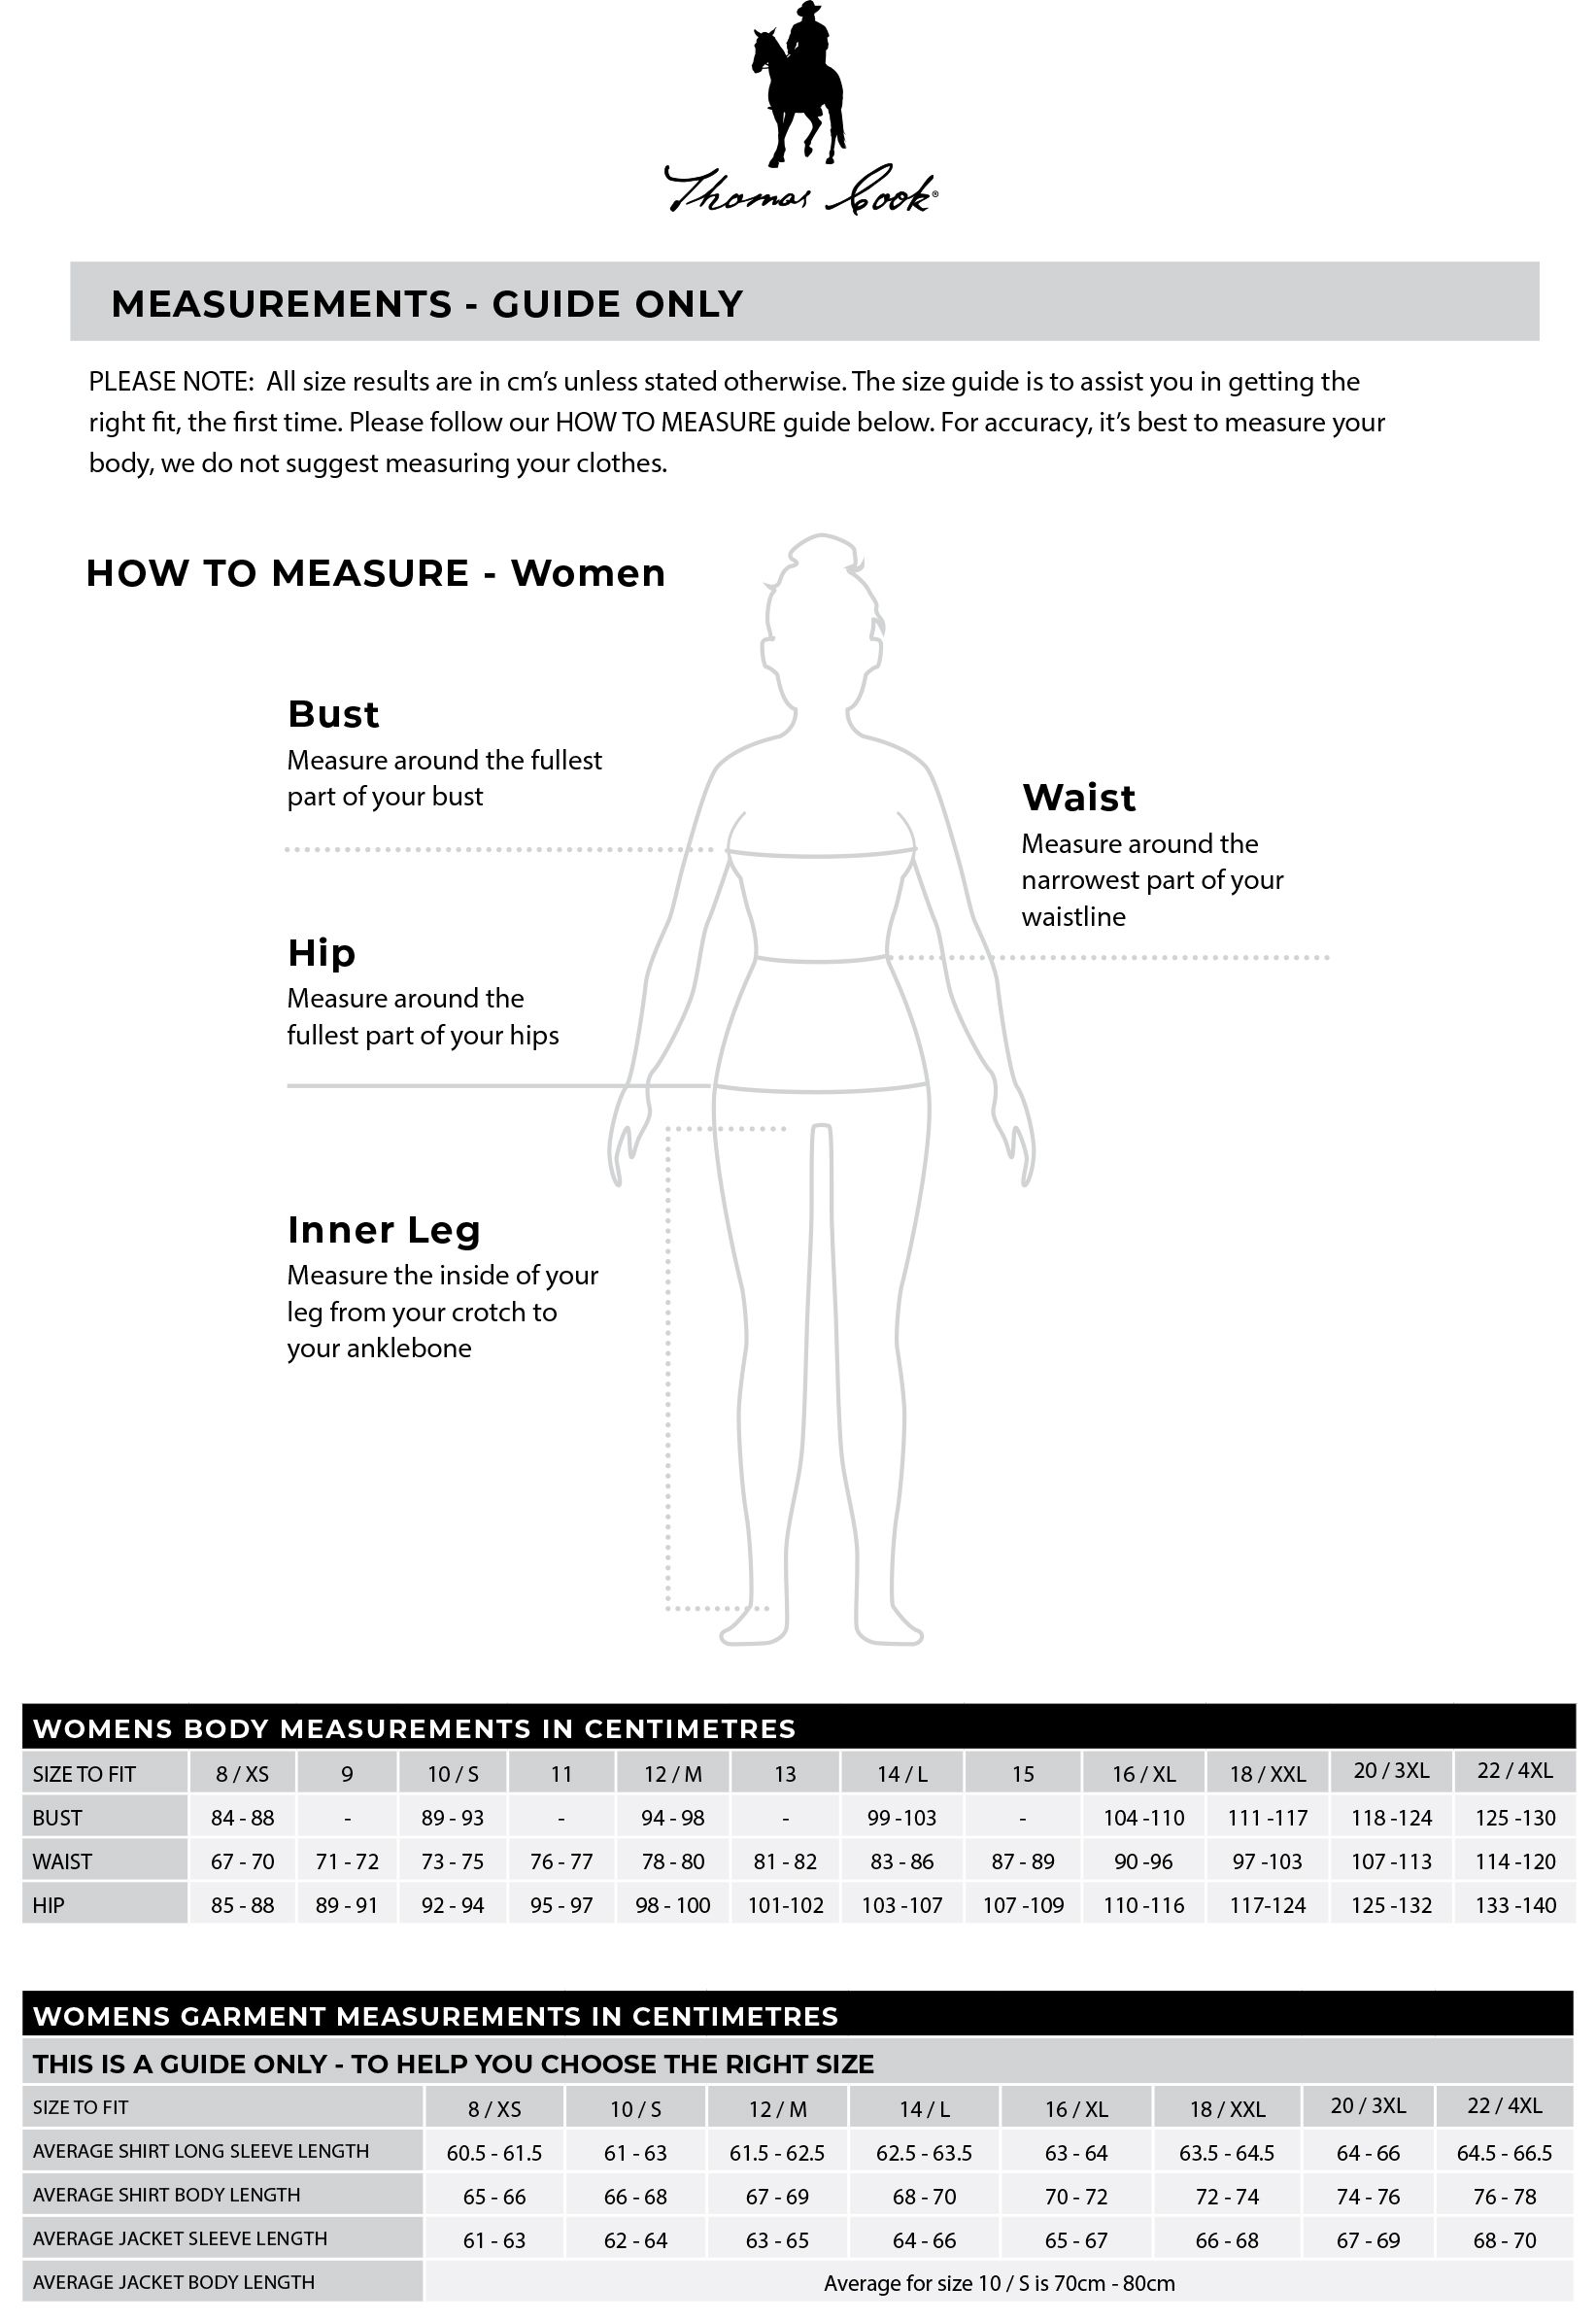 Thomas Cook Women's Size Guide.jpg